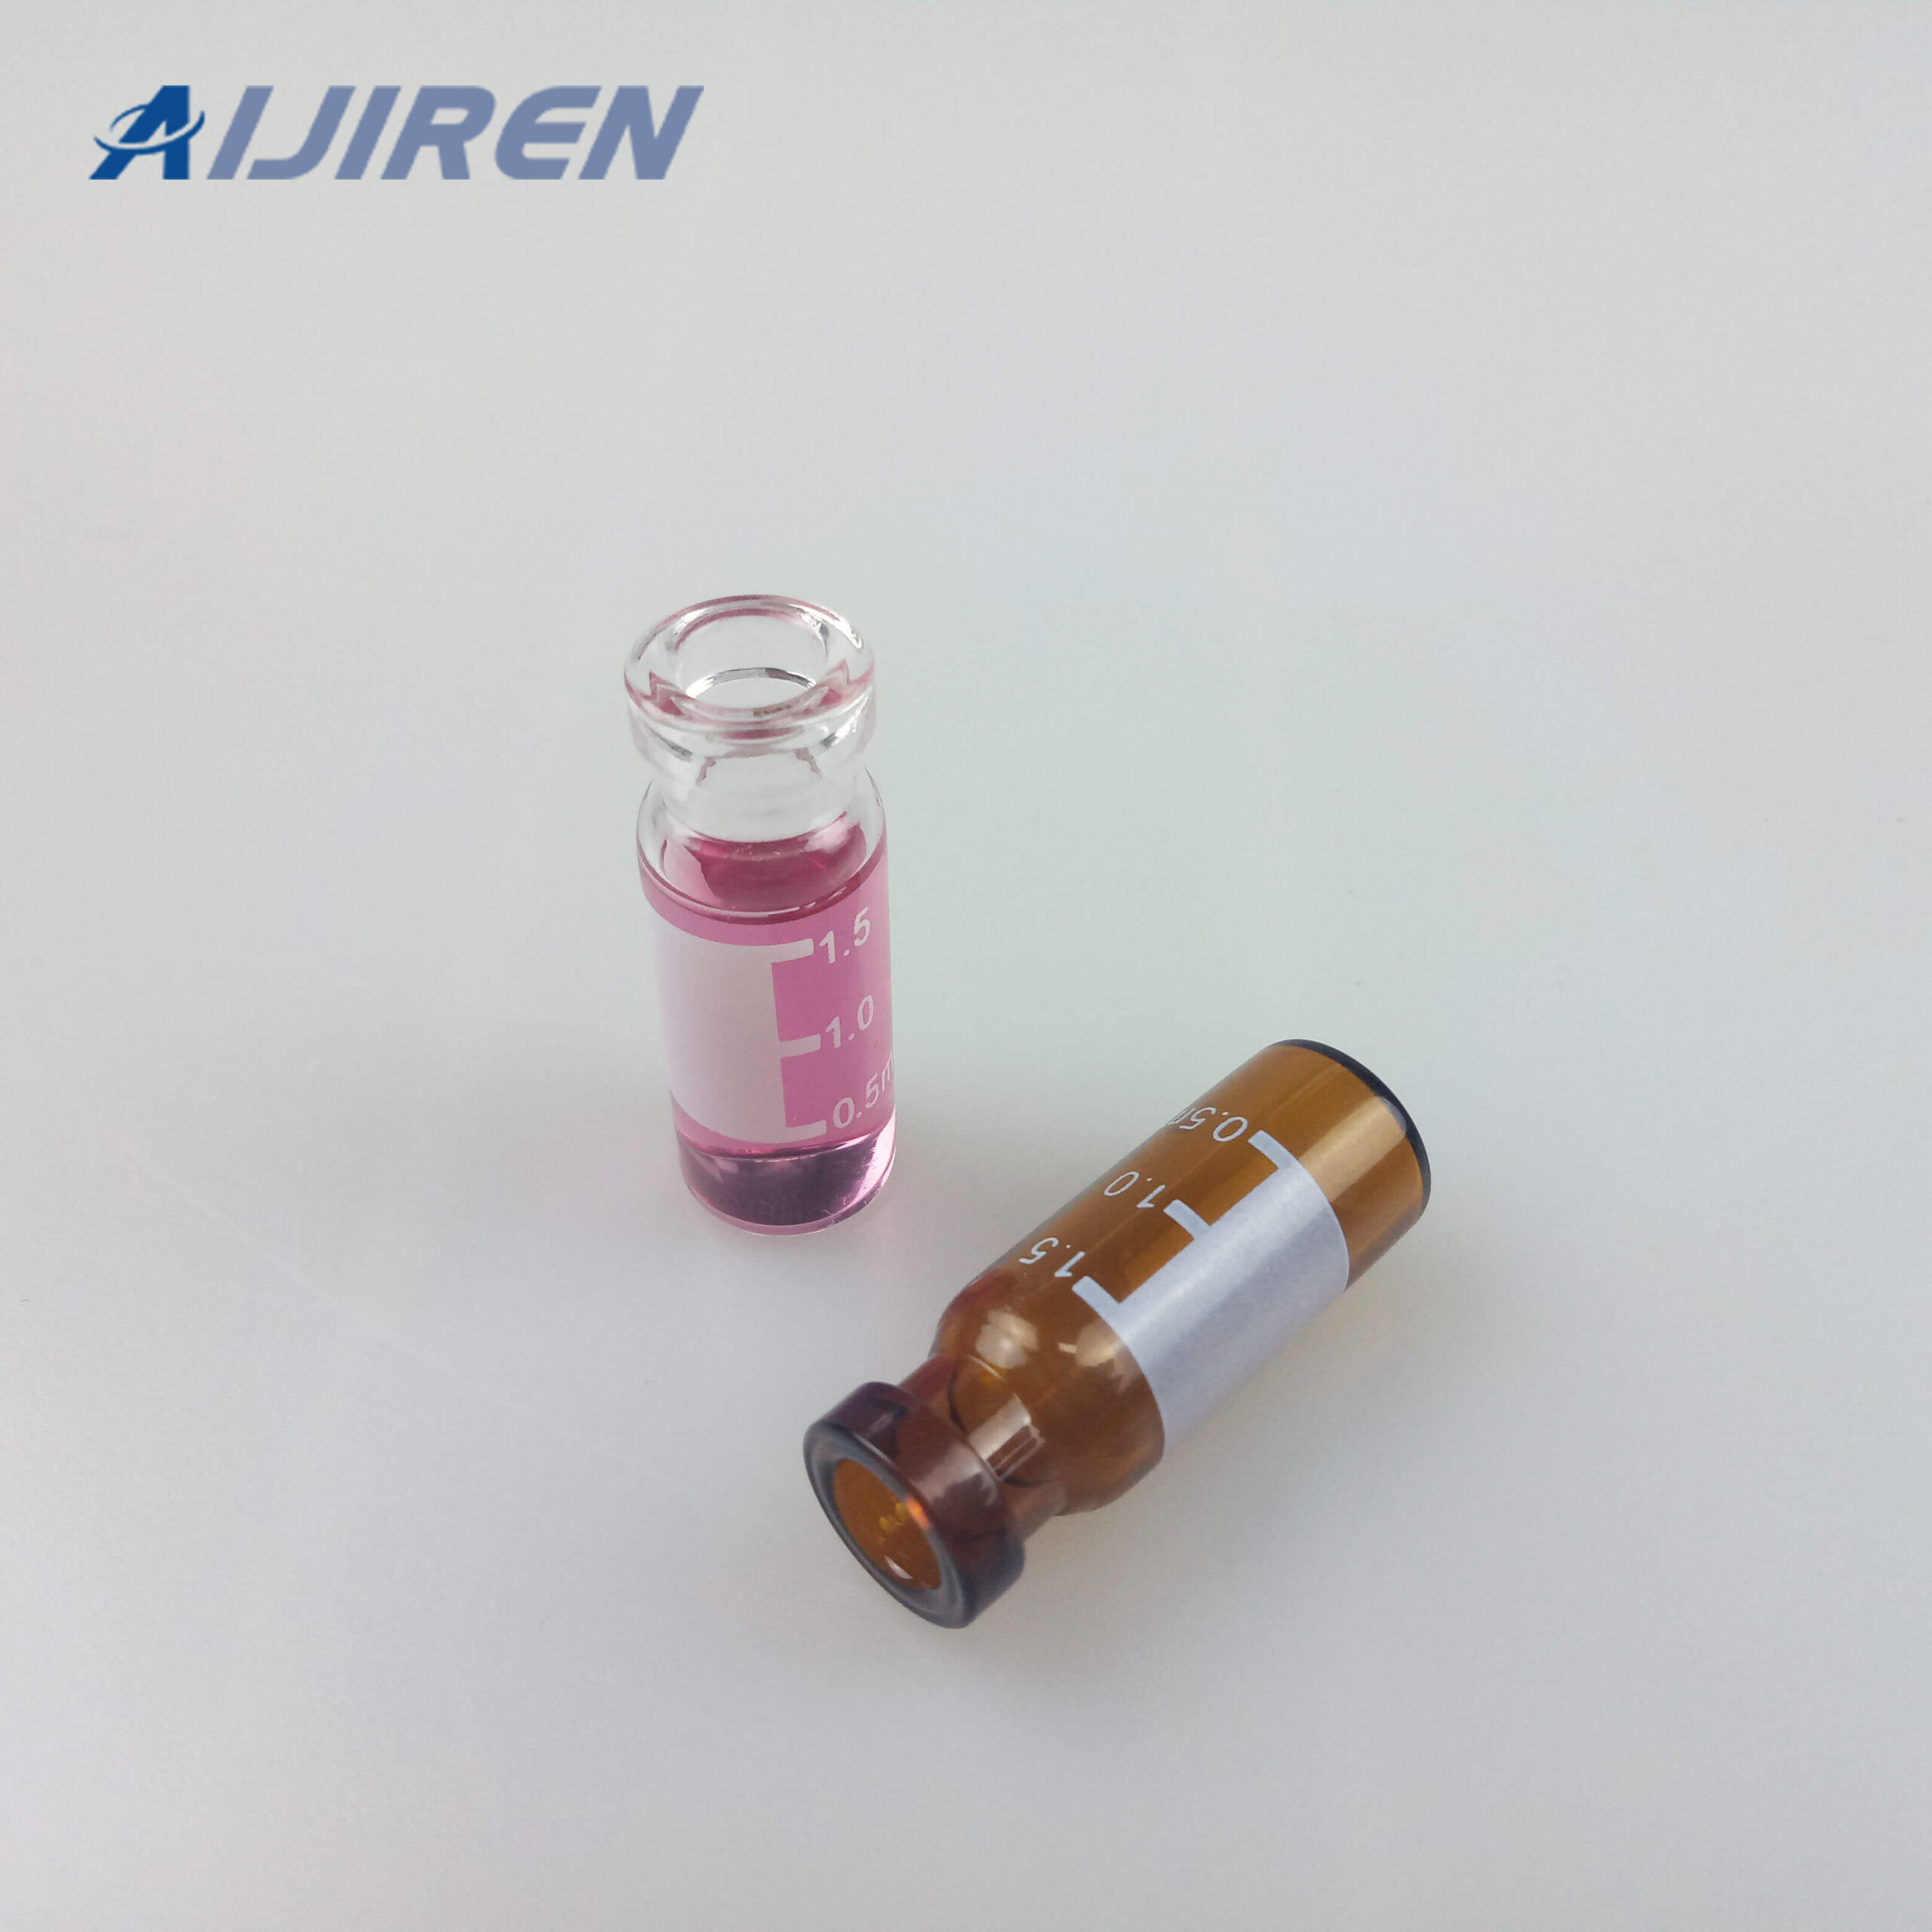 2ml Crimp Top Chromatography Vial with Label Area